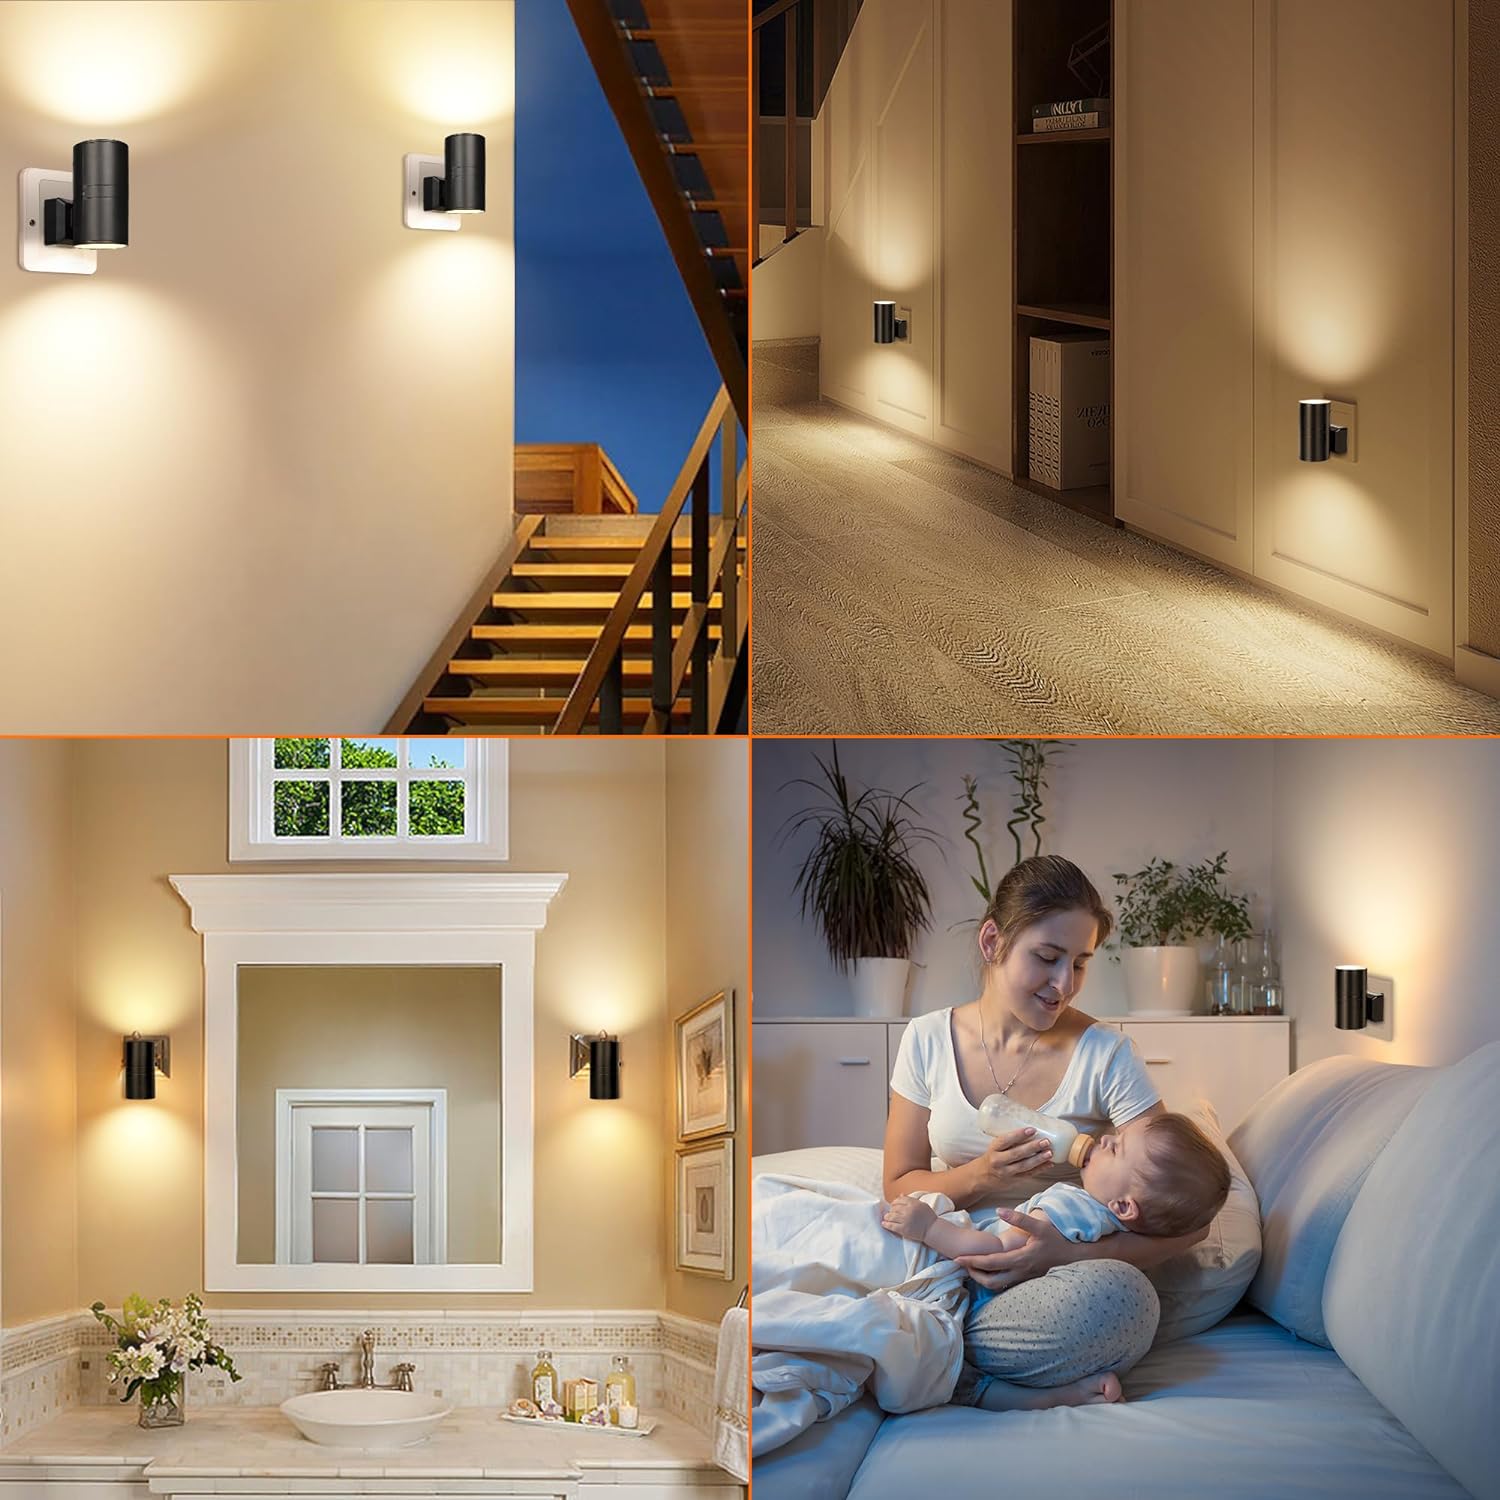 Ufanore Night Light Plug in, Vintage Night Light with Dusk to Dawn Sensor, Adjustable Brightness 0-100LM, Soft White 3000K, Dimmable Night Lamp for Children's Room,Hallway Bedroom Stair, 2 Pack